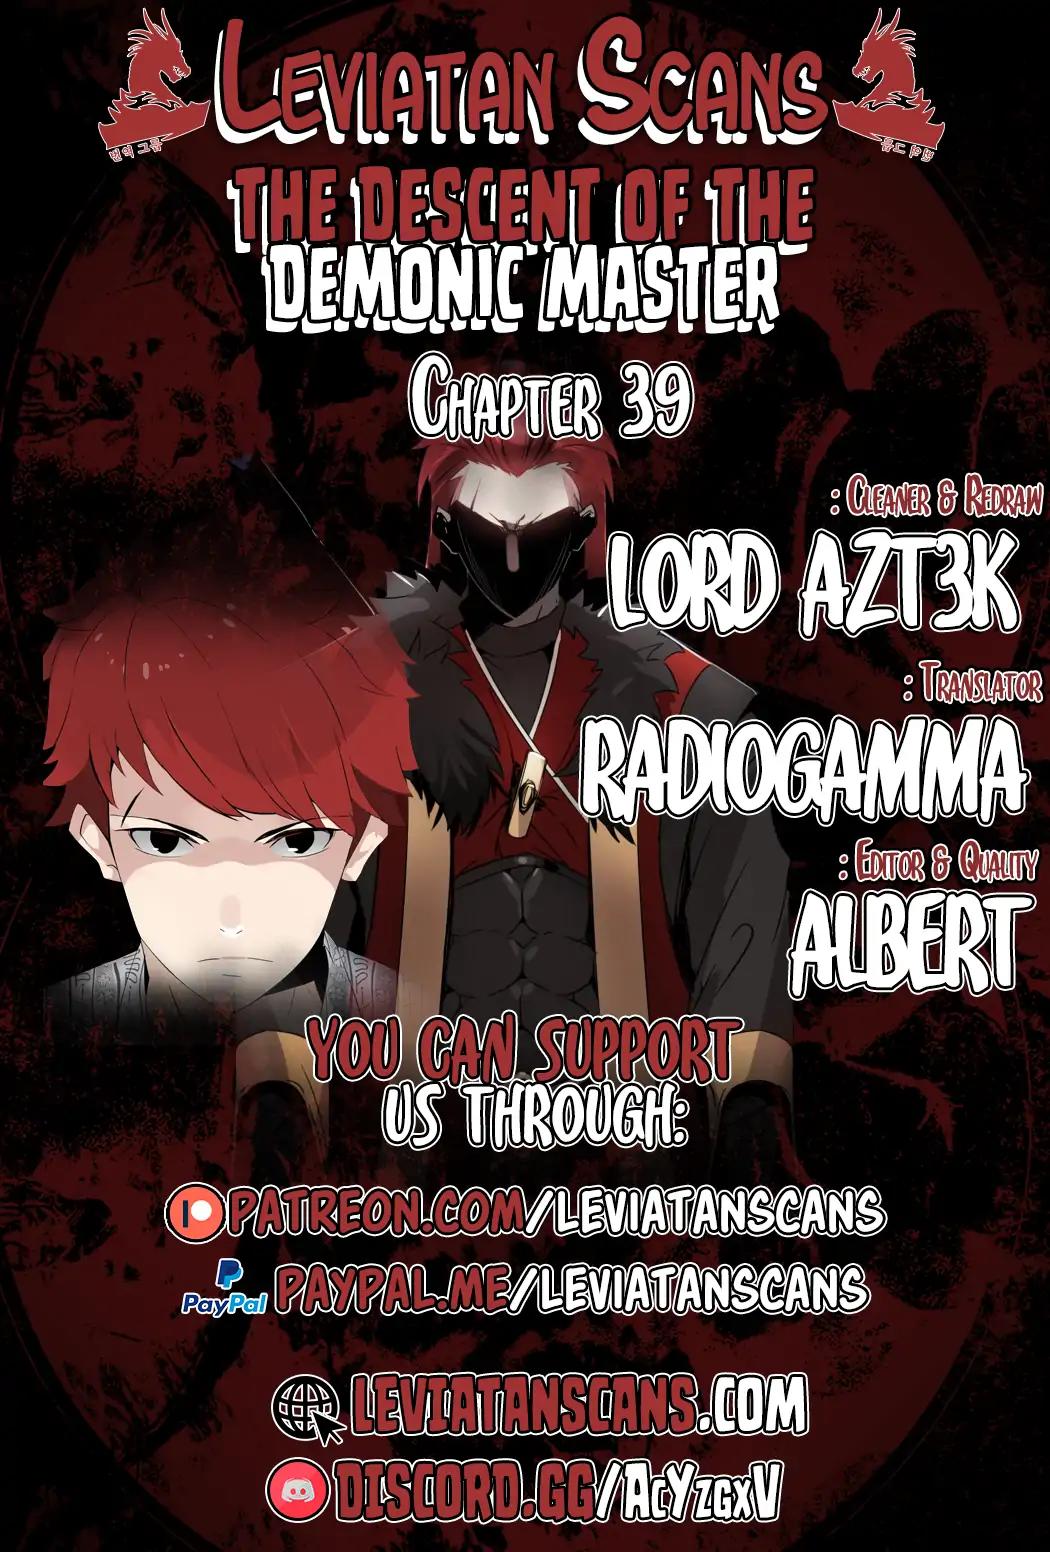 The Descent of the Demonic Master Chapter 39